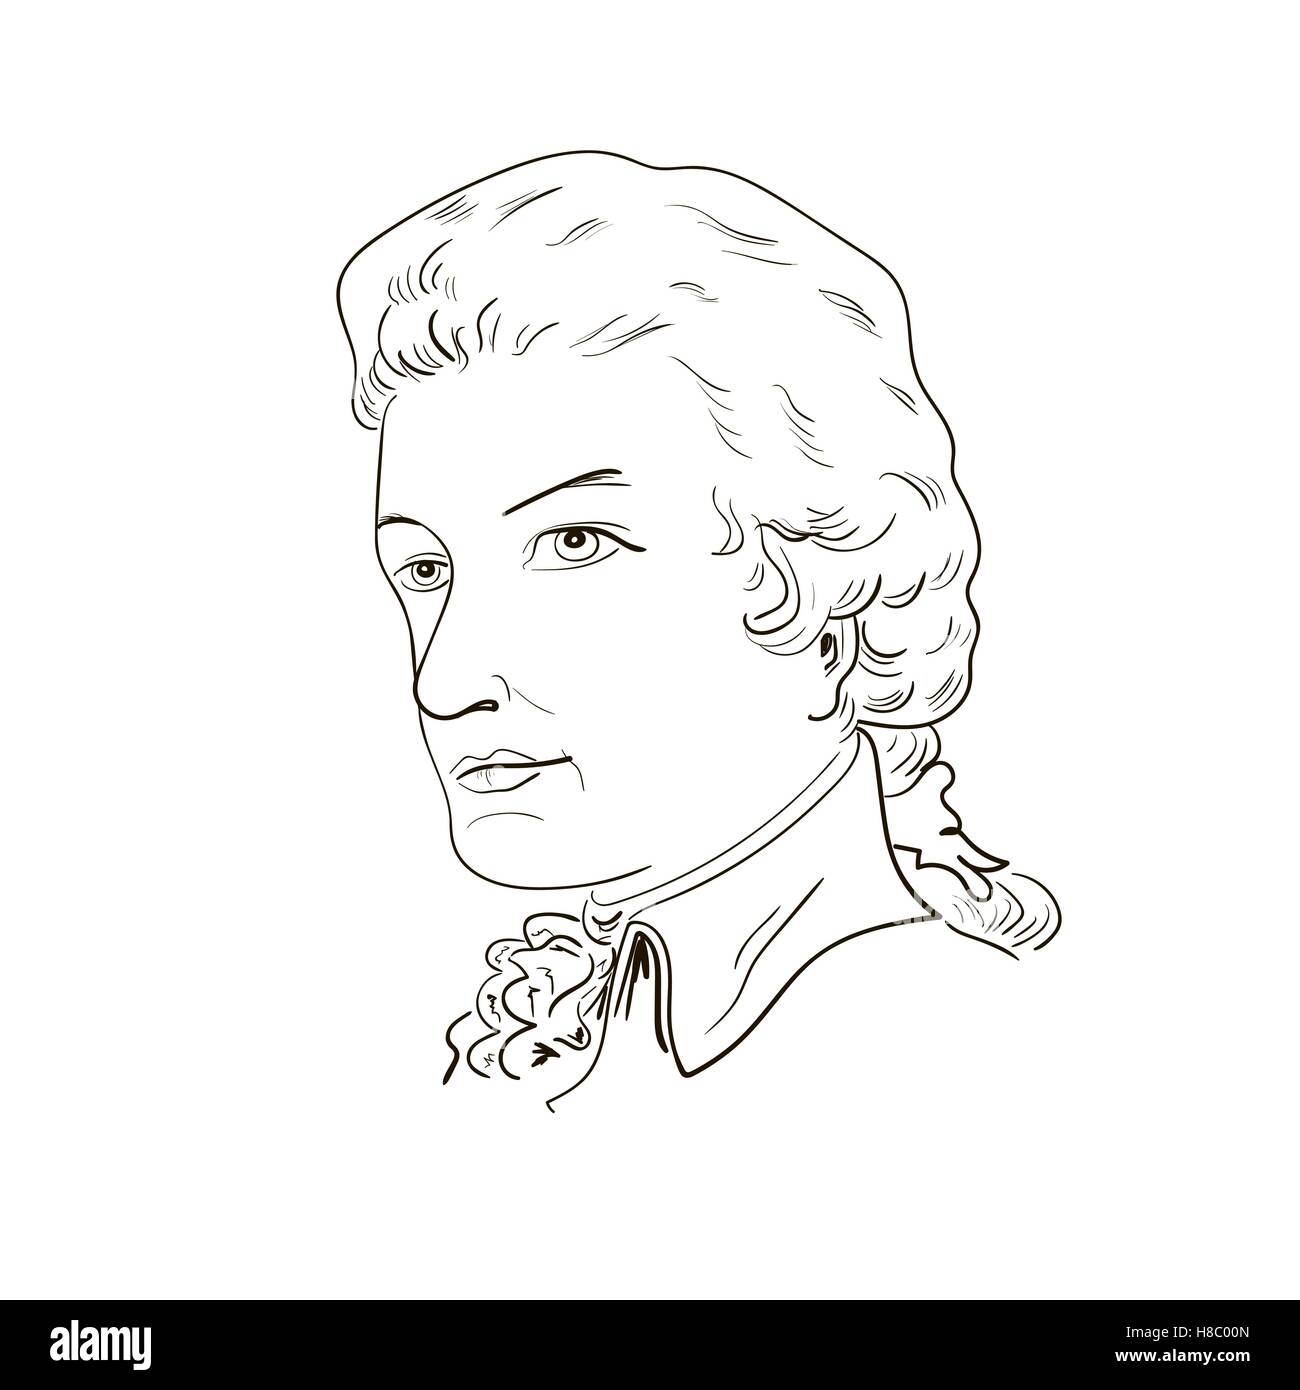 Wolfgang Amadeus Mozart. Sketch portrait. black and white. Vector illustration. Stock Vector